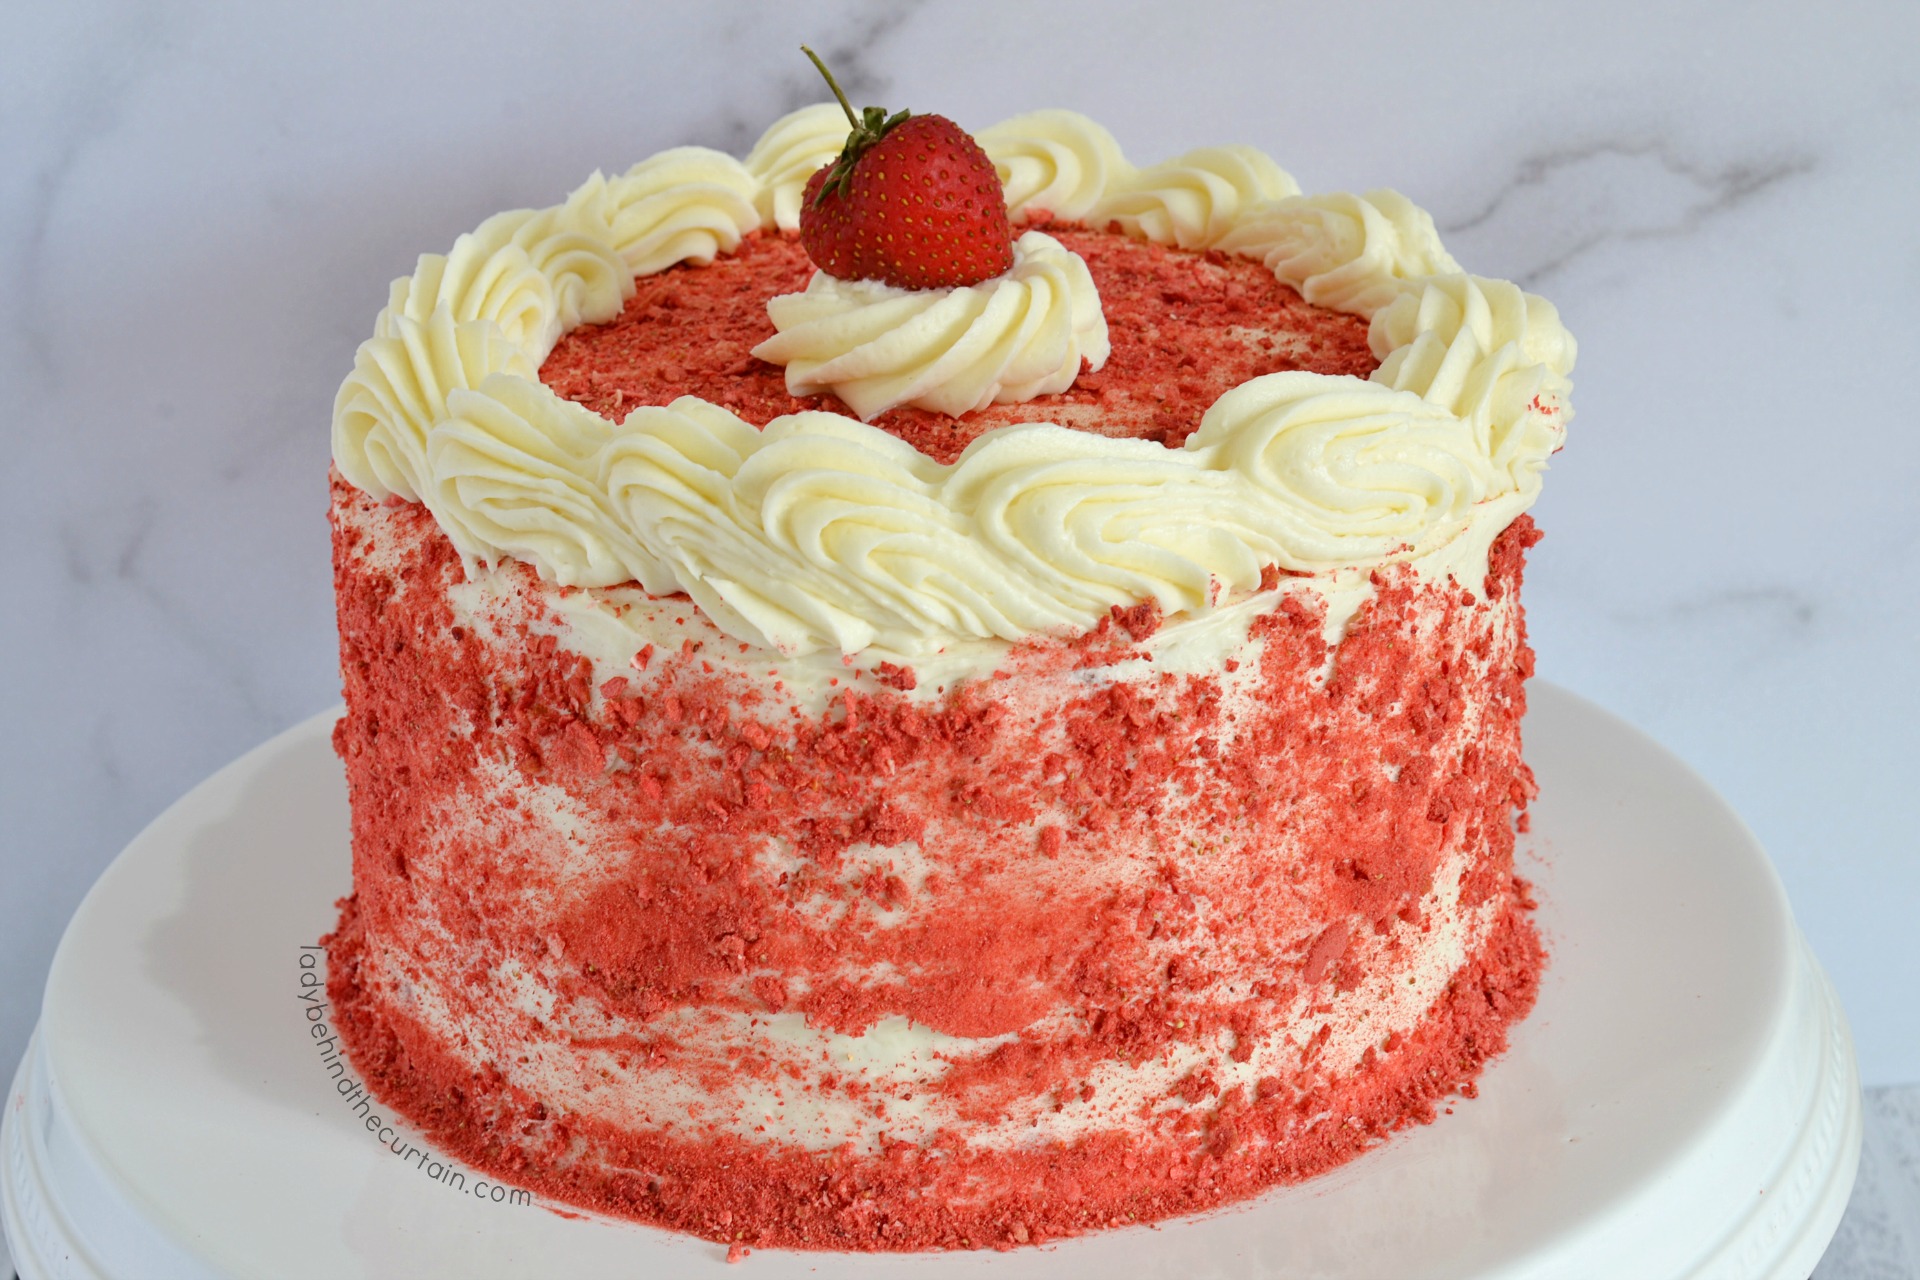 Strawberry Cake - no artificial colour or flavour added!